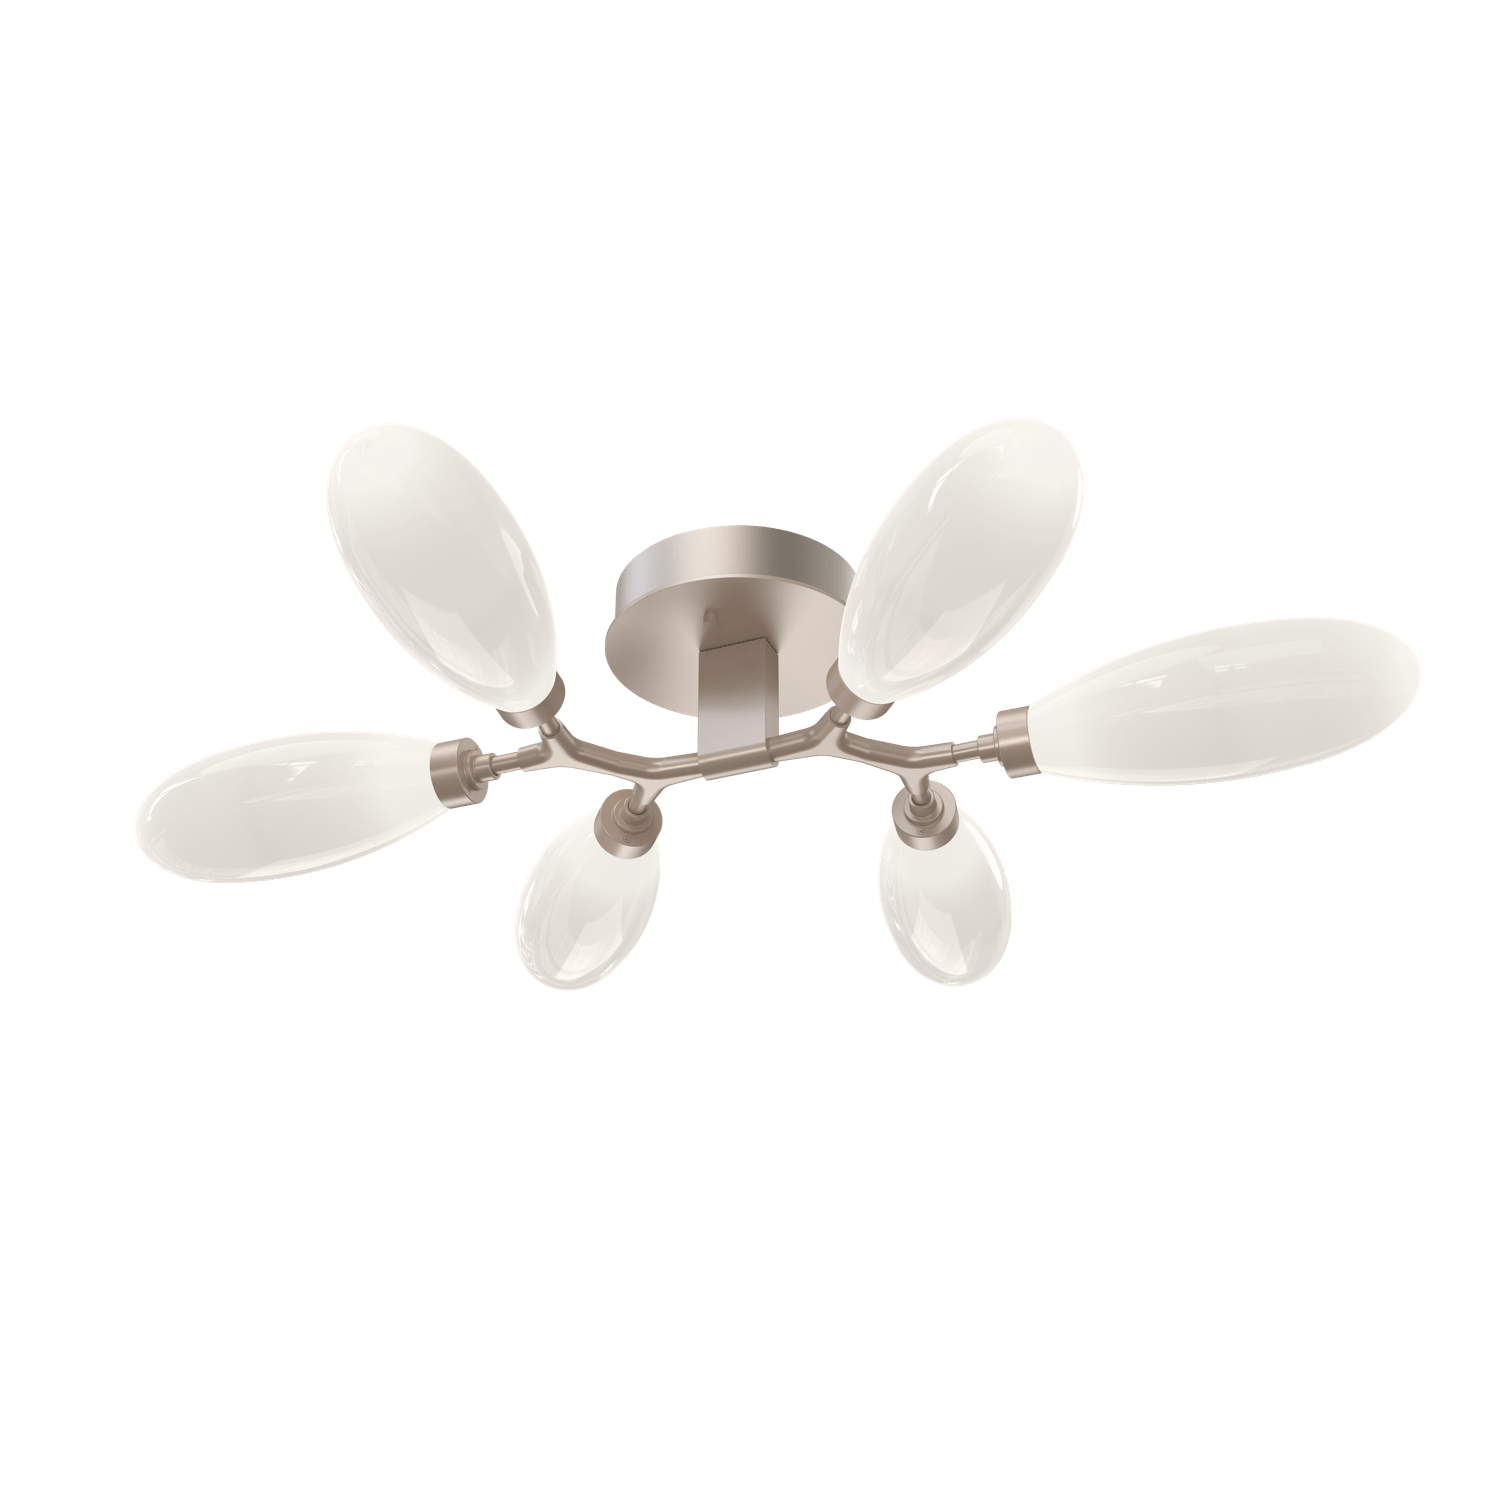 CLB0071-01-BS-WL-LL-Hammerton-Studio-Fiori-6-light-organic-flush-mount-light-with-metallic-beige-silver-finish-and-opal-white-glass-shades-and-LED-lamping